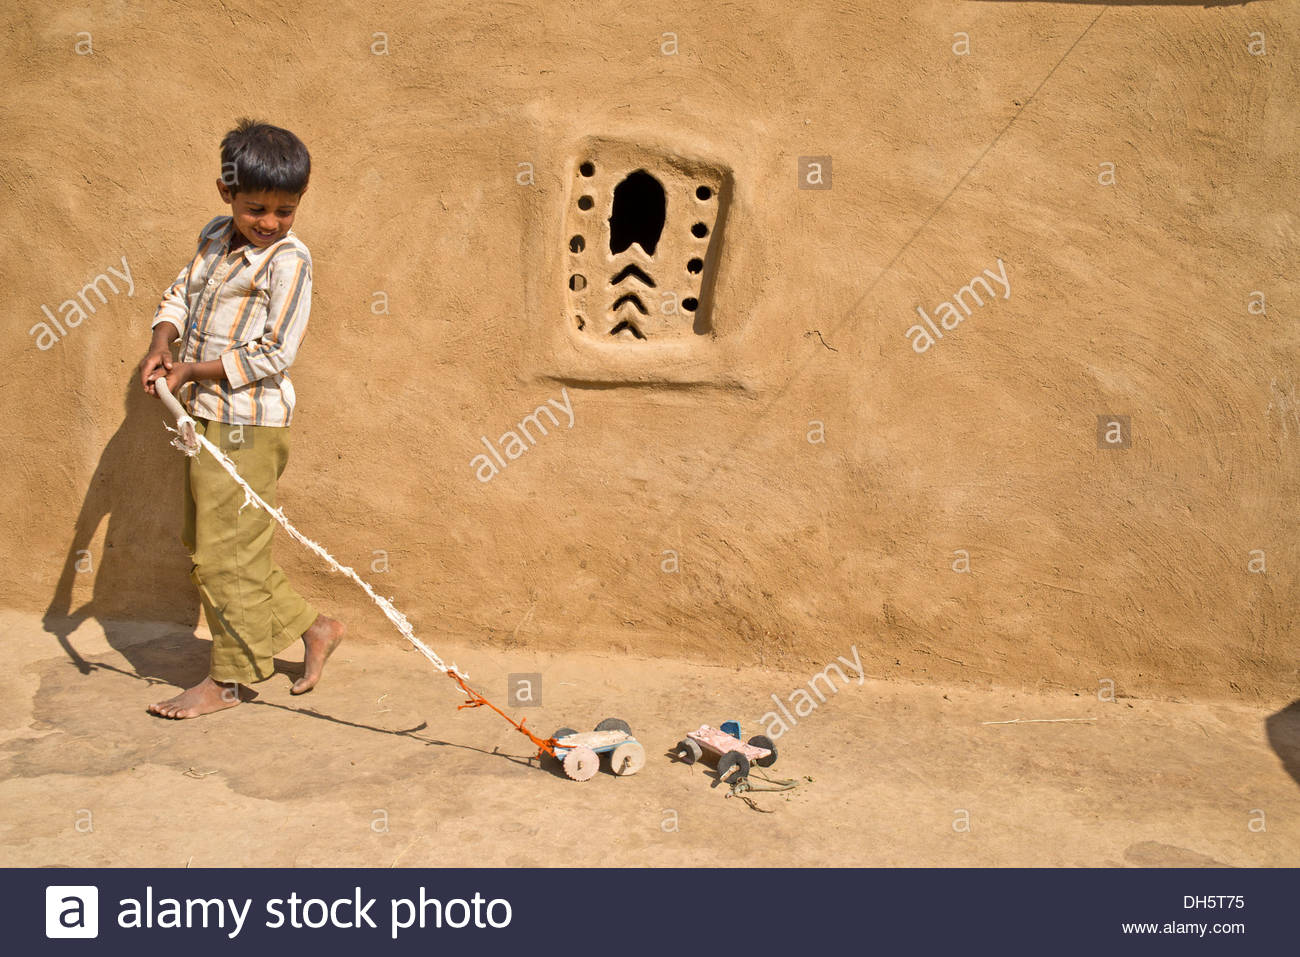 boy-playing-with-a-home-made-toy-cars-outside-a-mud-house-wste-thar-DH5T75.jpg